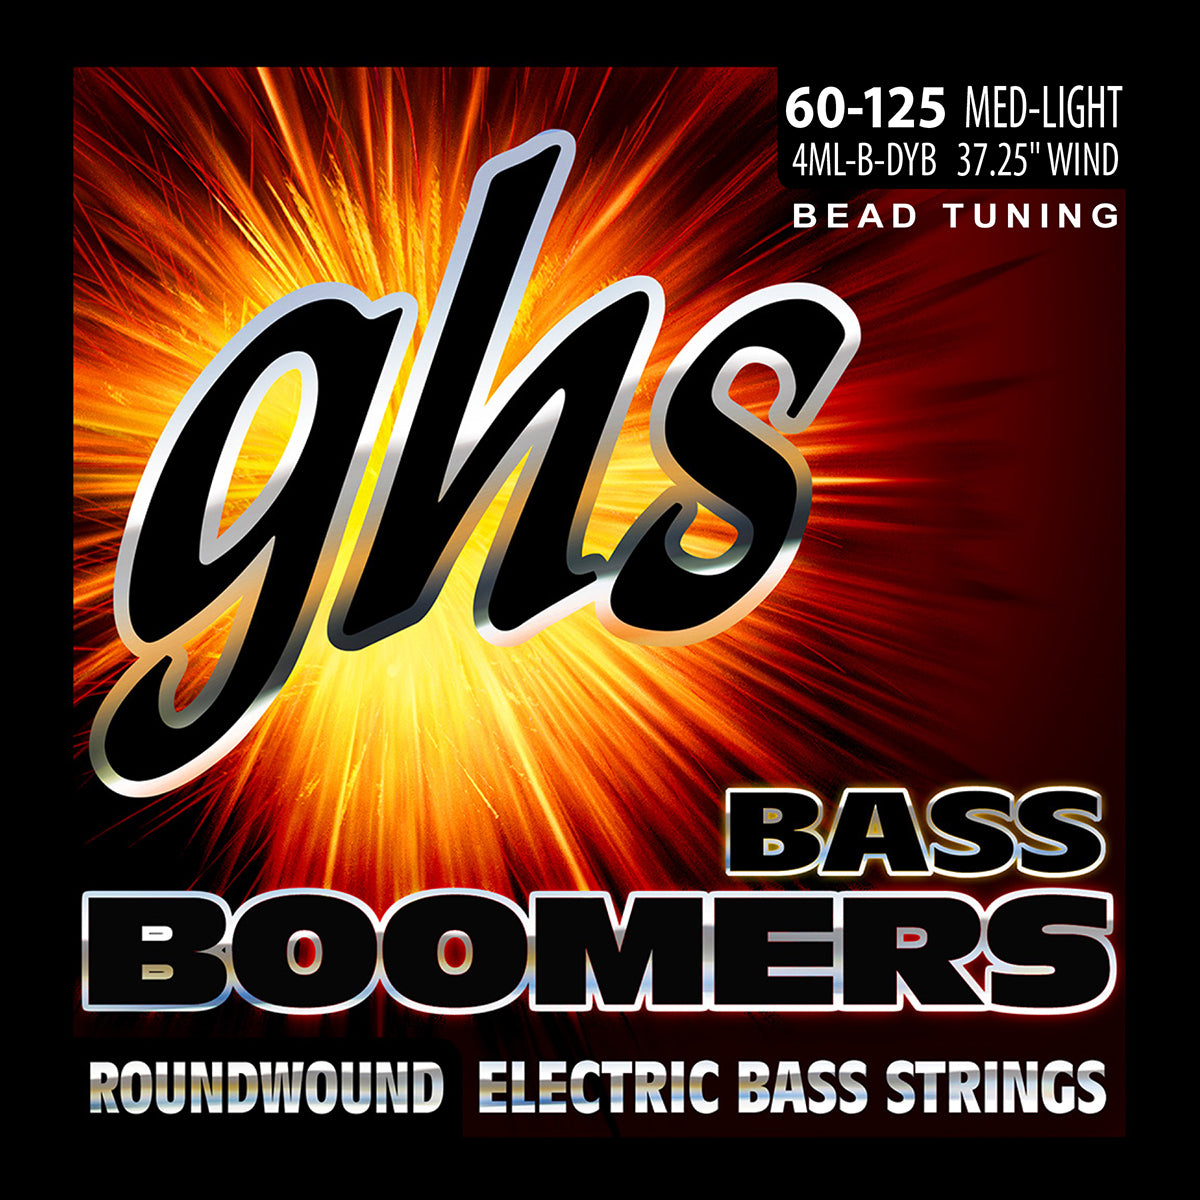 GHS Strings GHS Bass Boomers Nickel Wound Bass String Set Long Scale - 4-String 60-125 BEAD 4ML-B-DYB